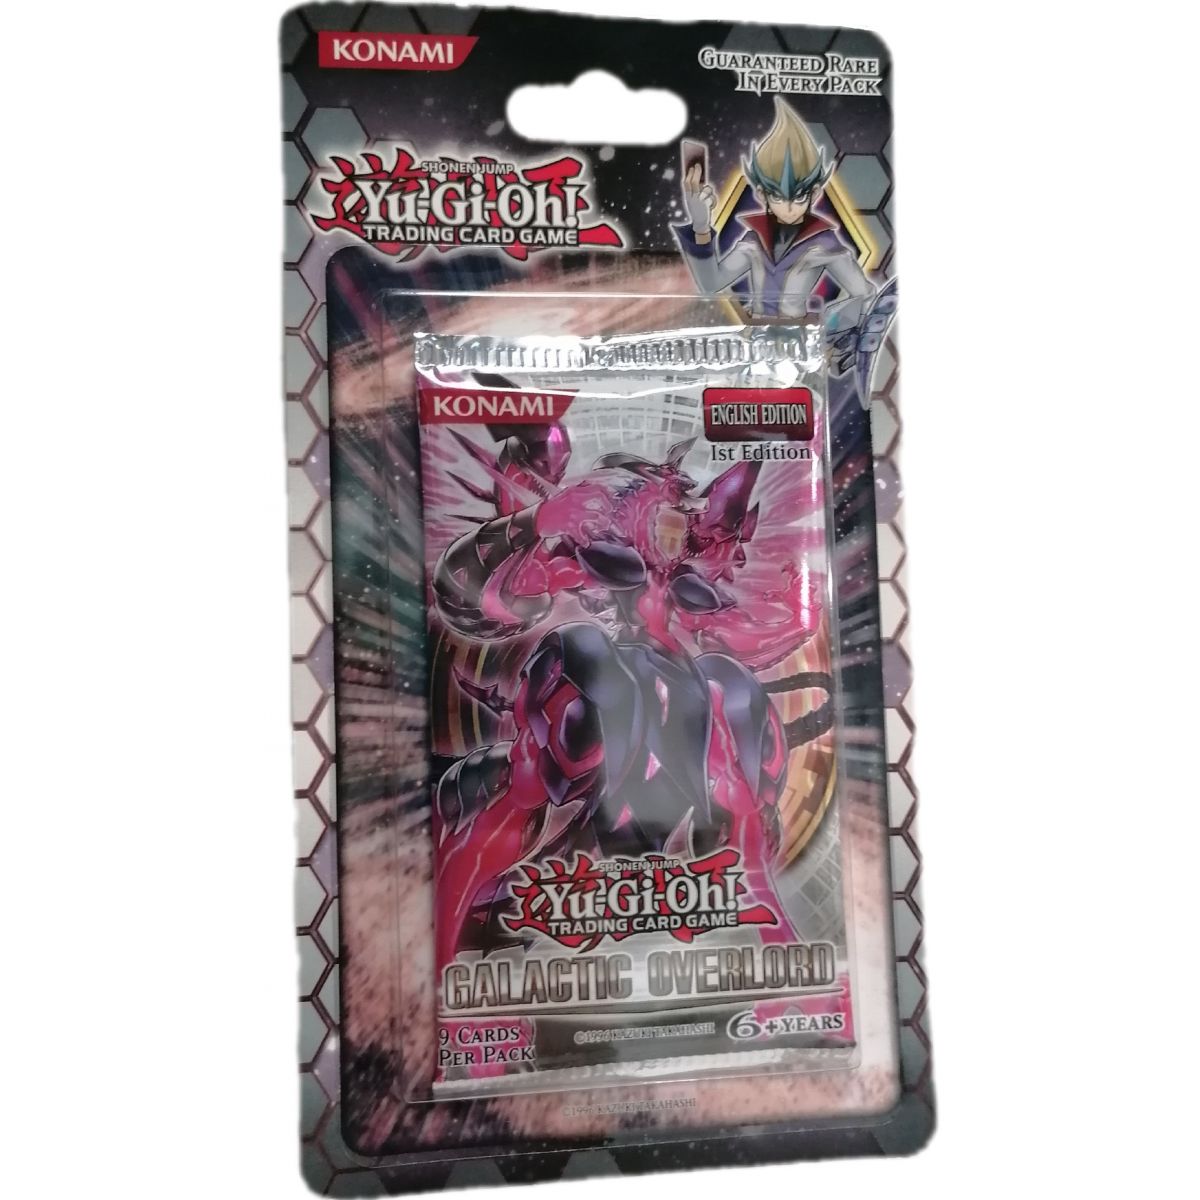 *US-Druck VERSIEGELT* Yu-Gi-Oh! - Booster – Galactic Overlord BLISTER PACK – 1. Auflage